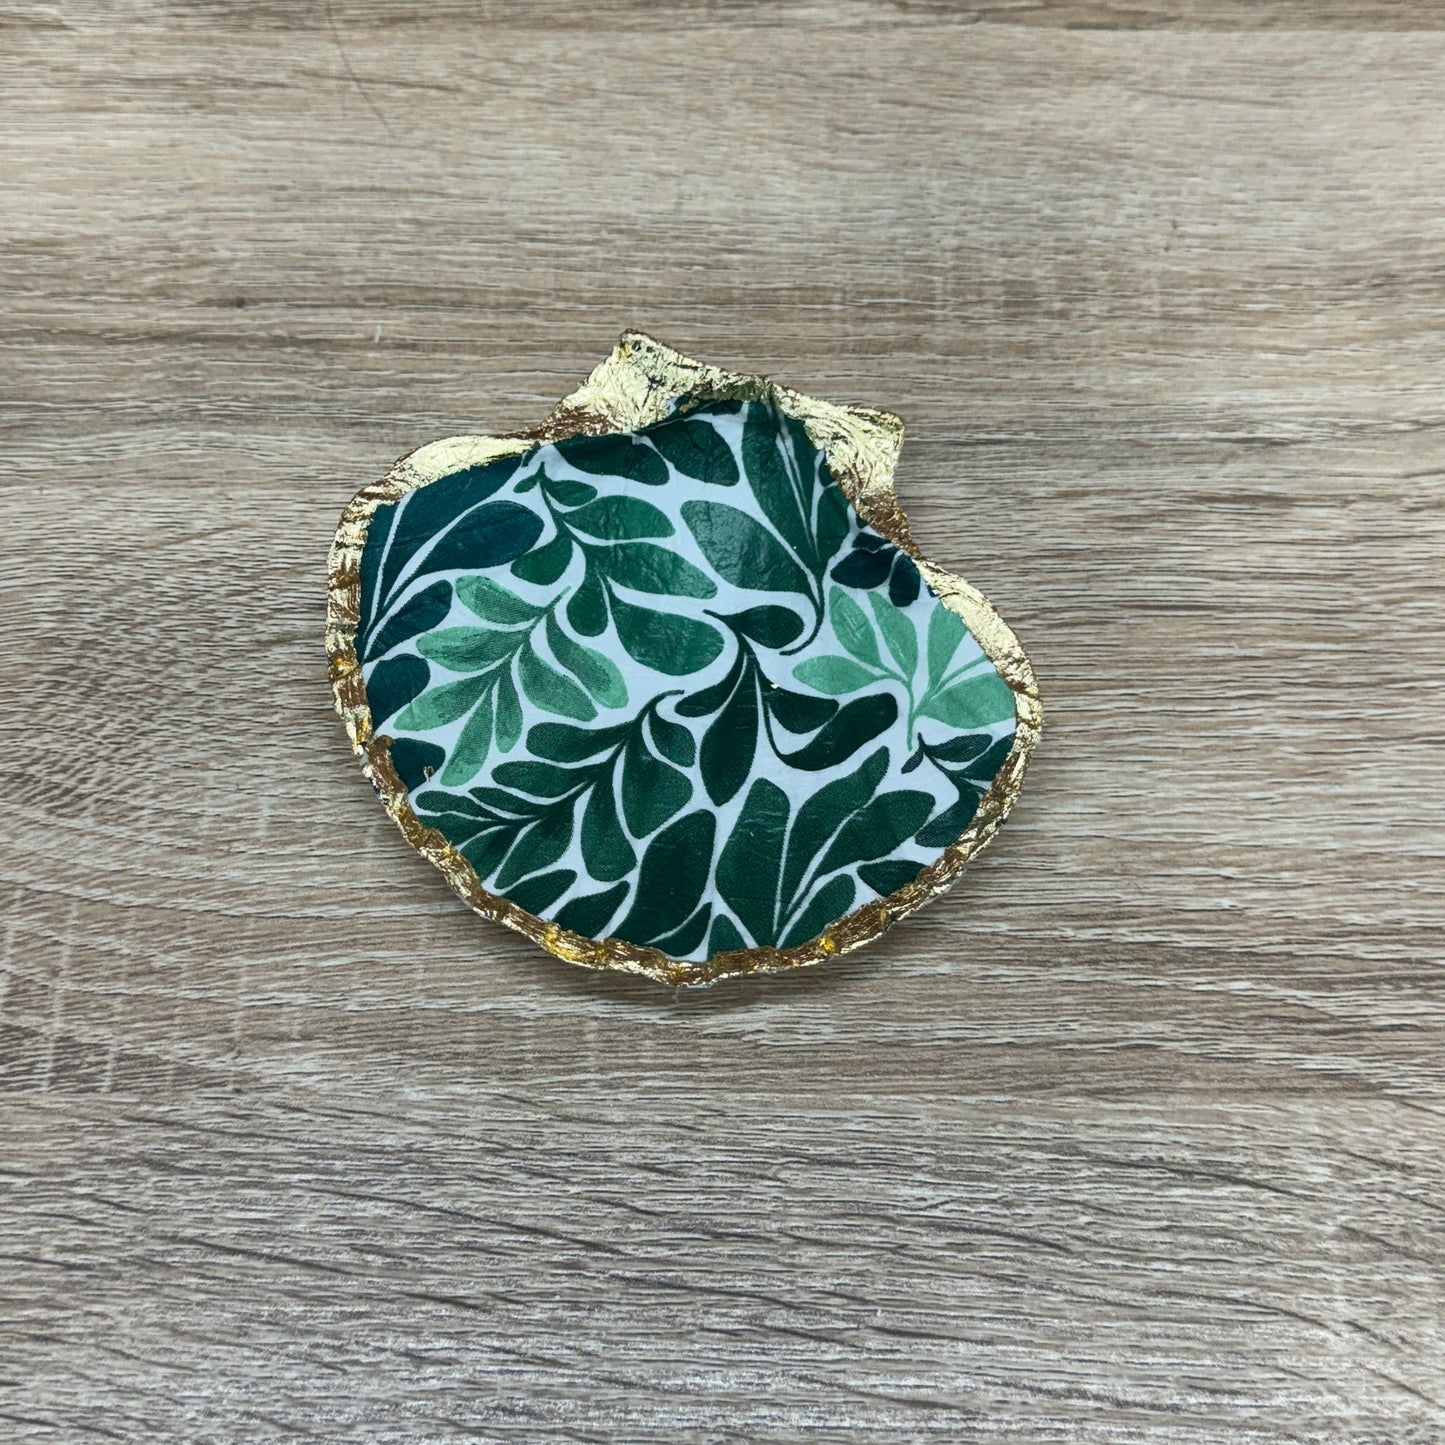 Decoupaged Scallop Shell - Green Leaves